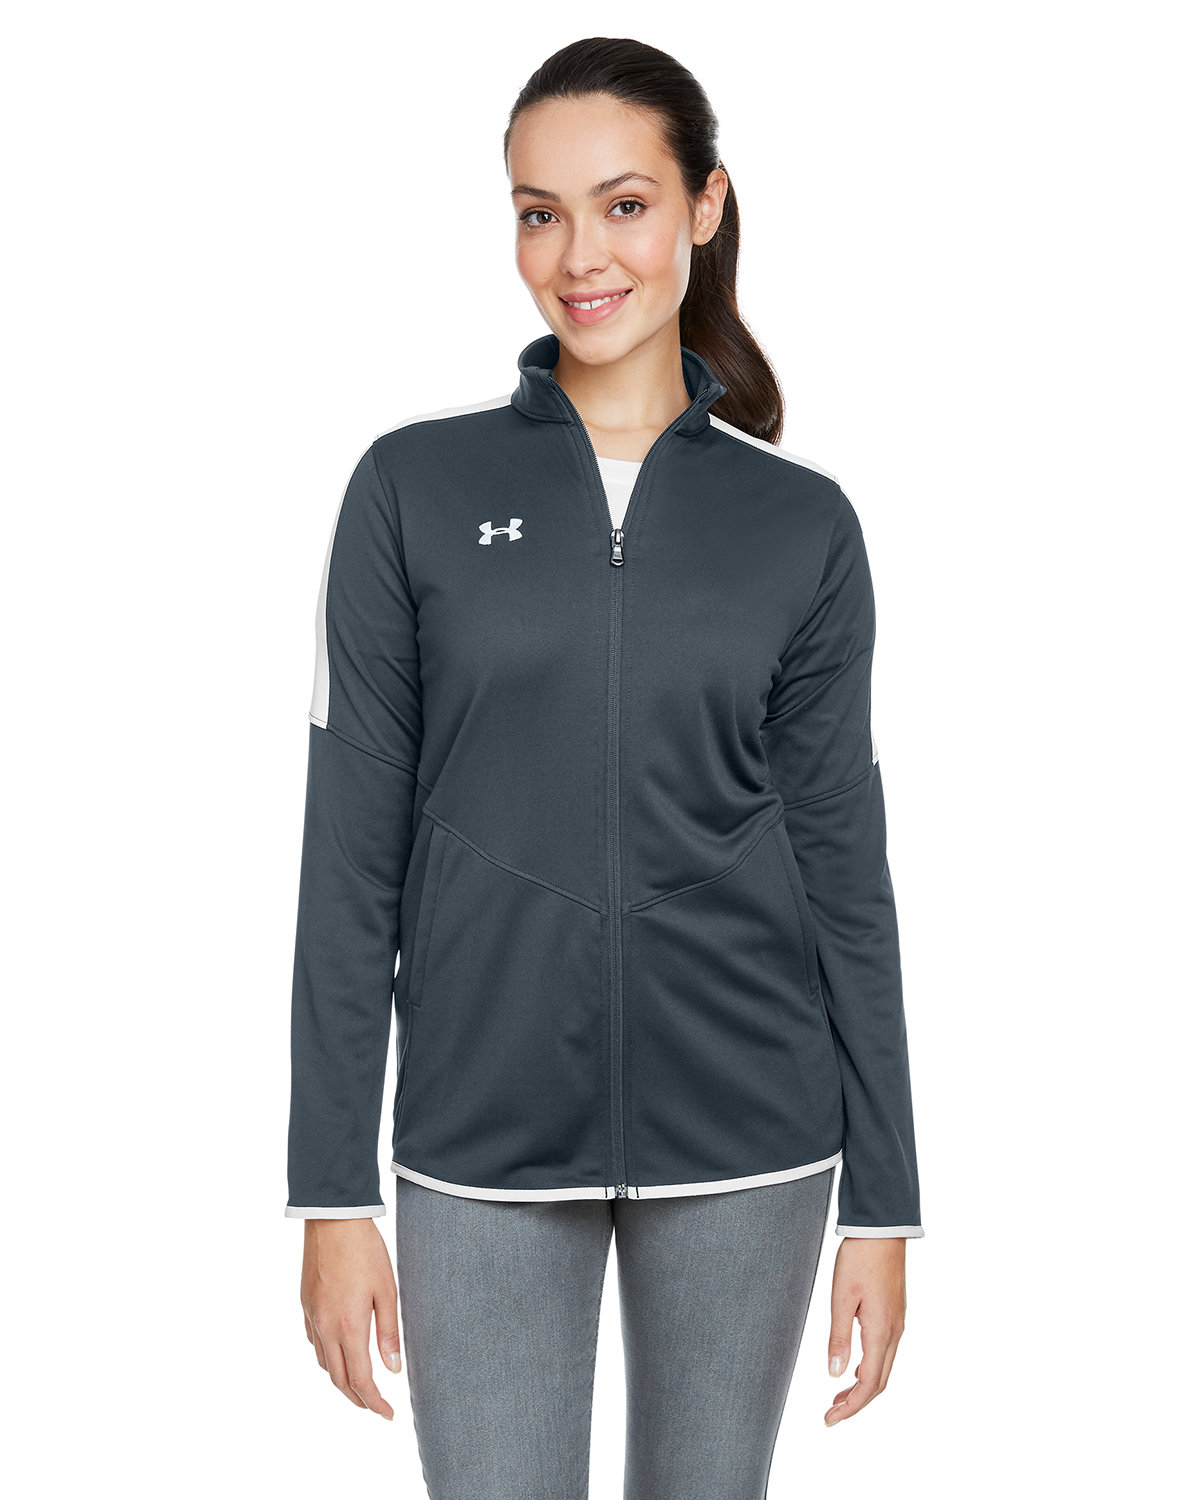 Ladies Rival Knit Jacket-Under Armour